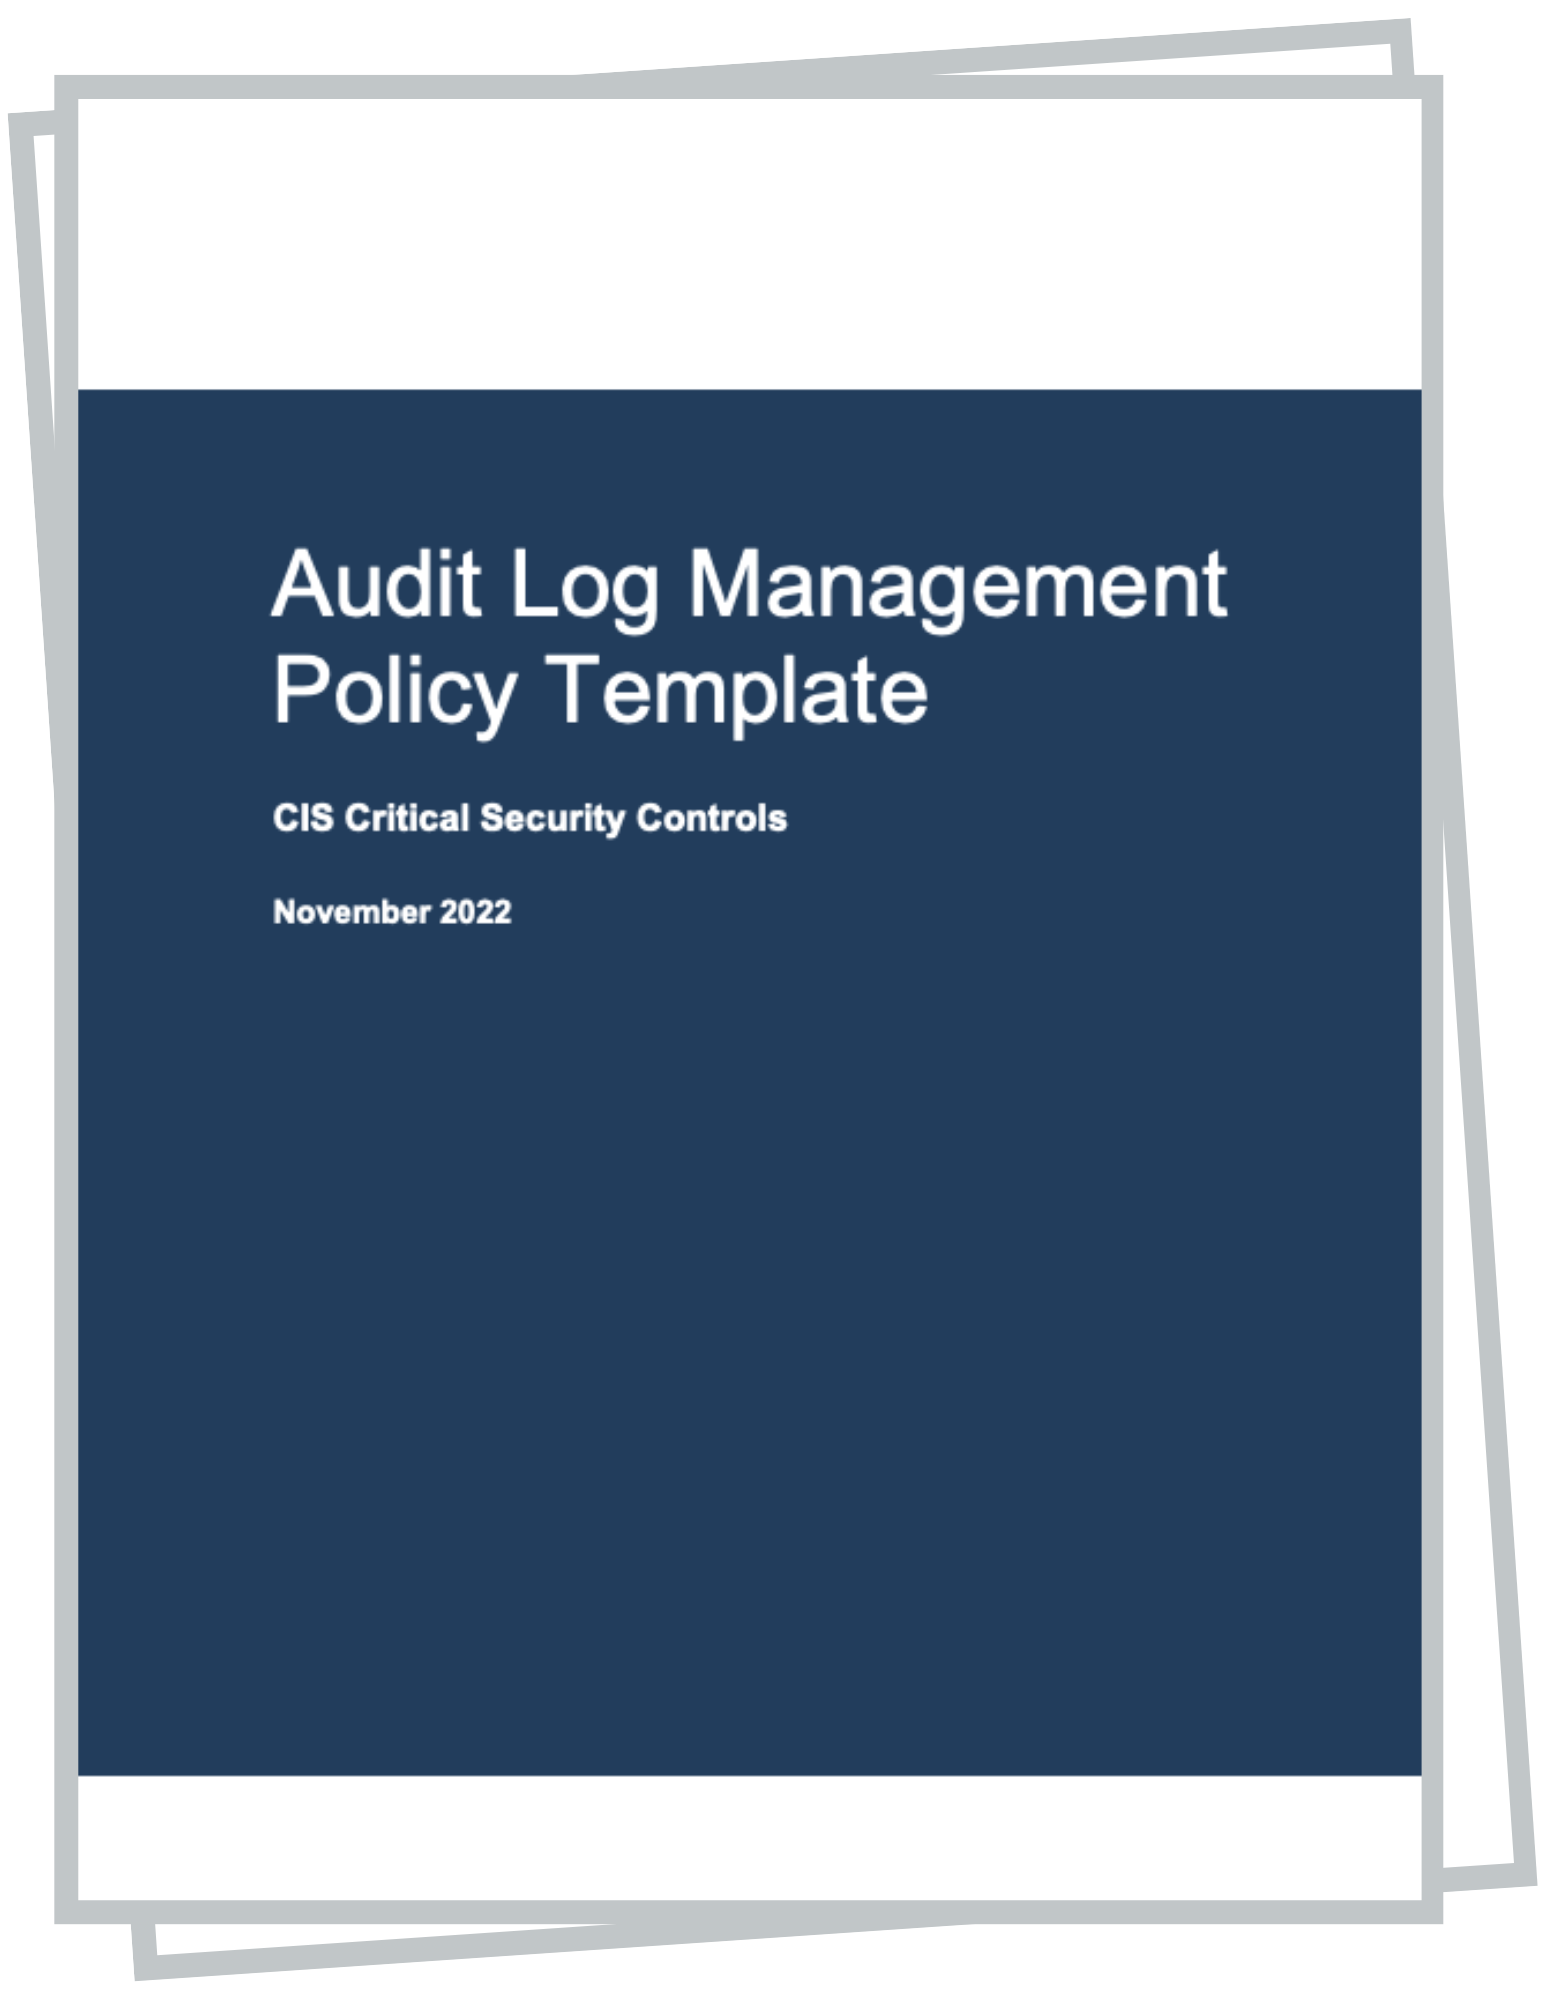 Audit Log Management Policy Template for CIS Control 8 image